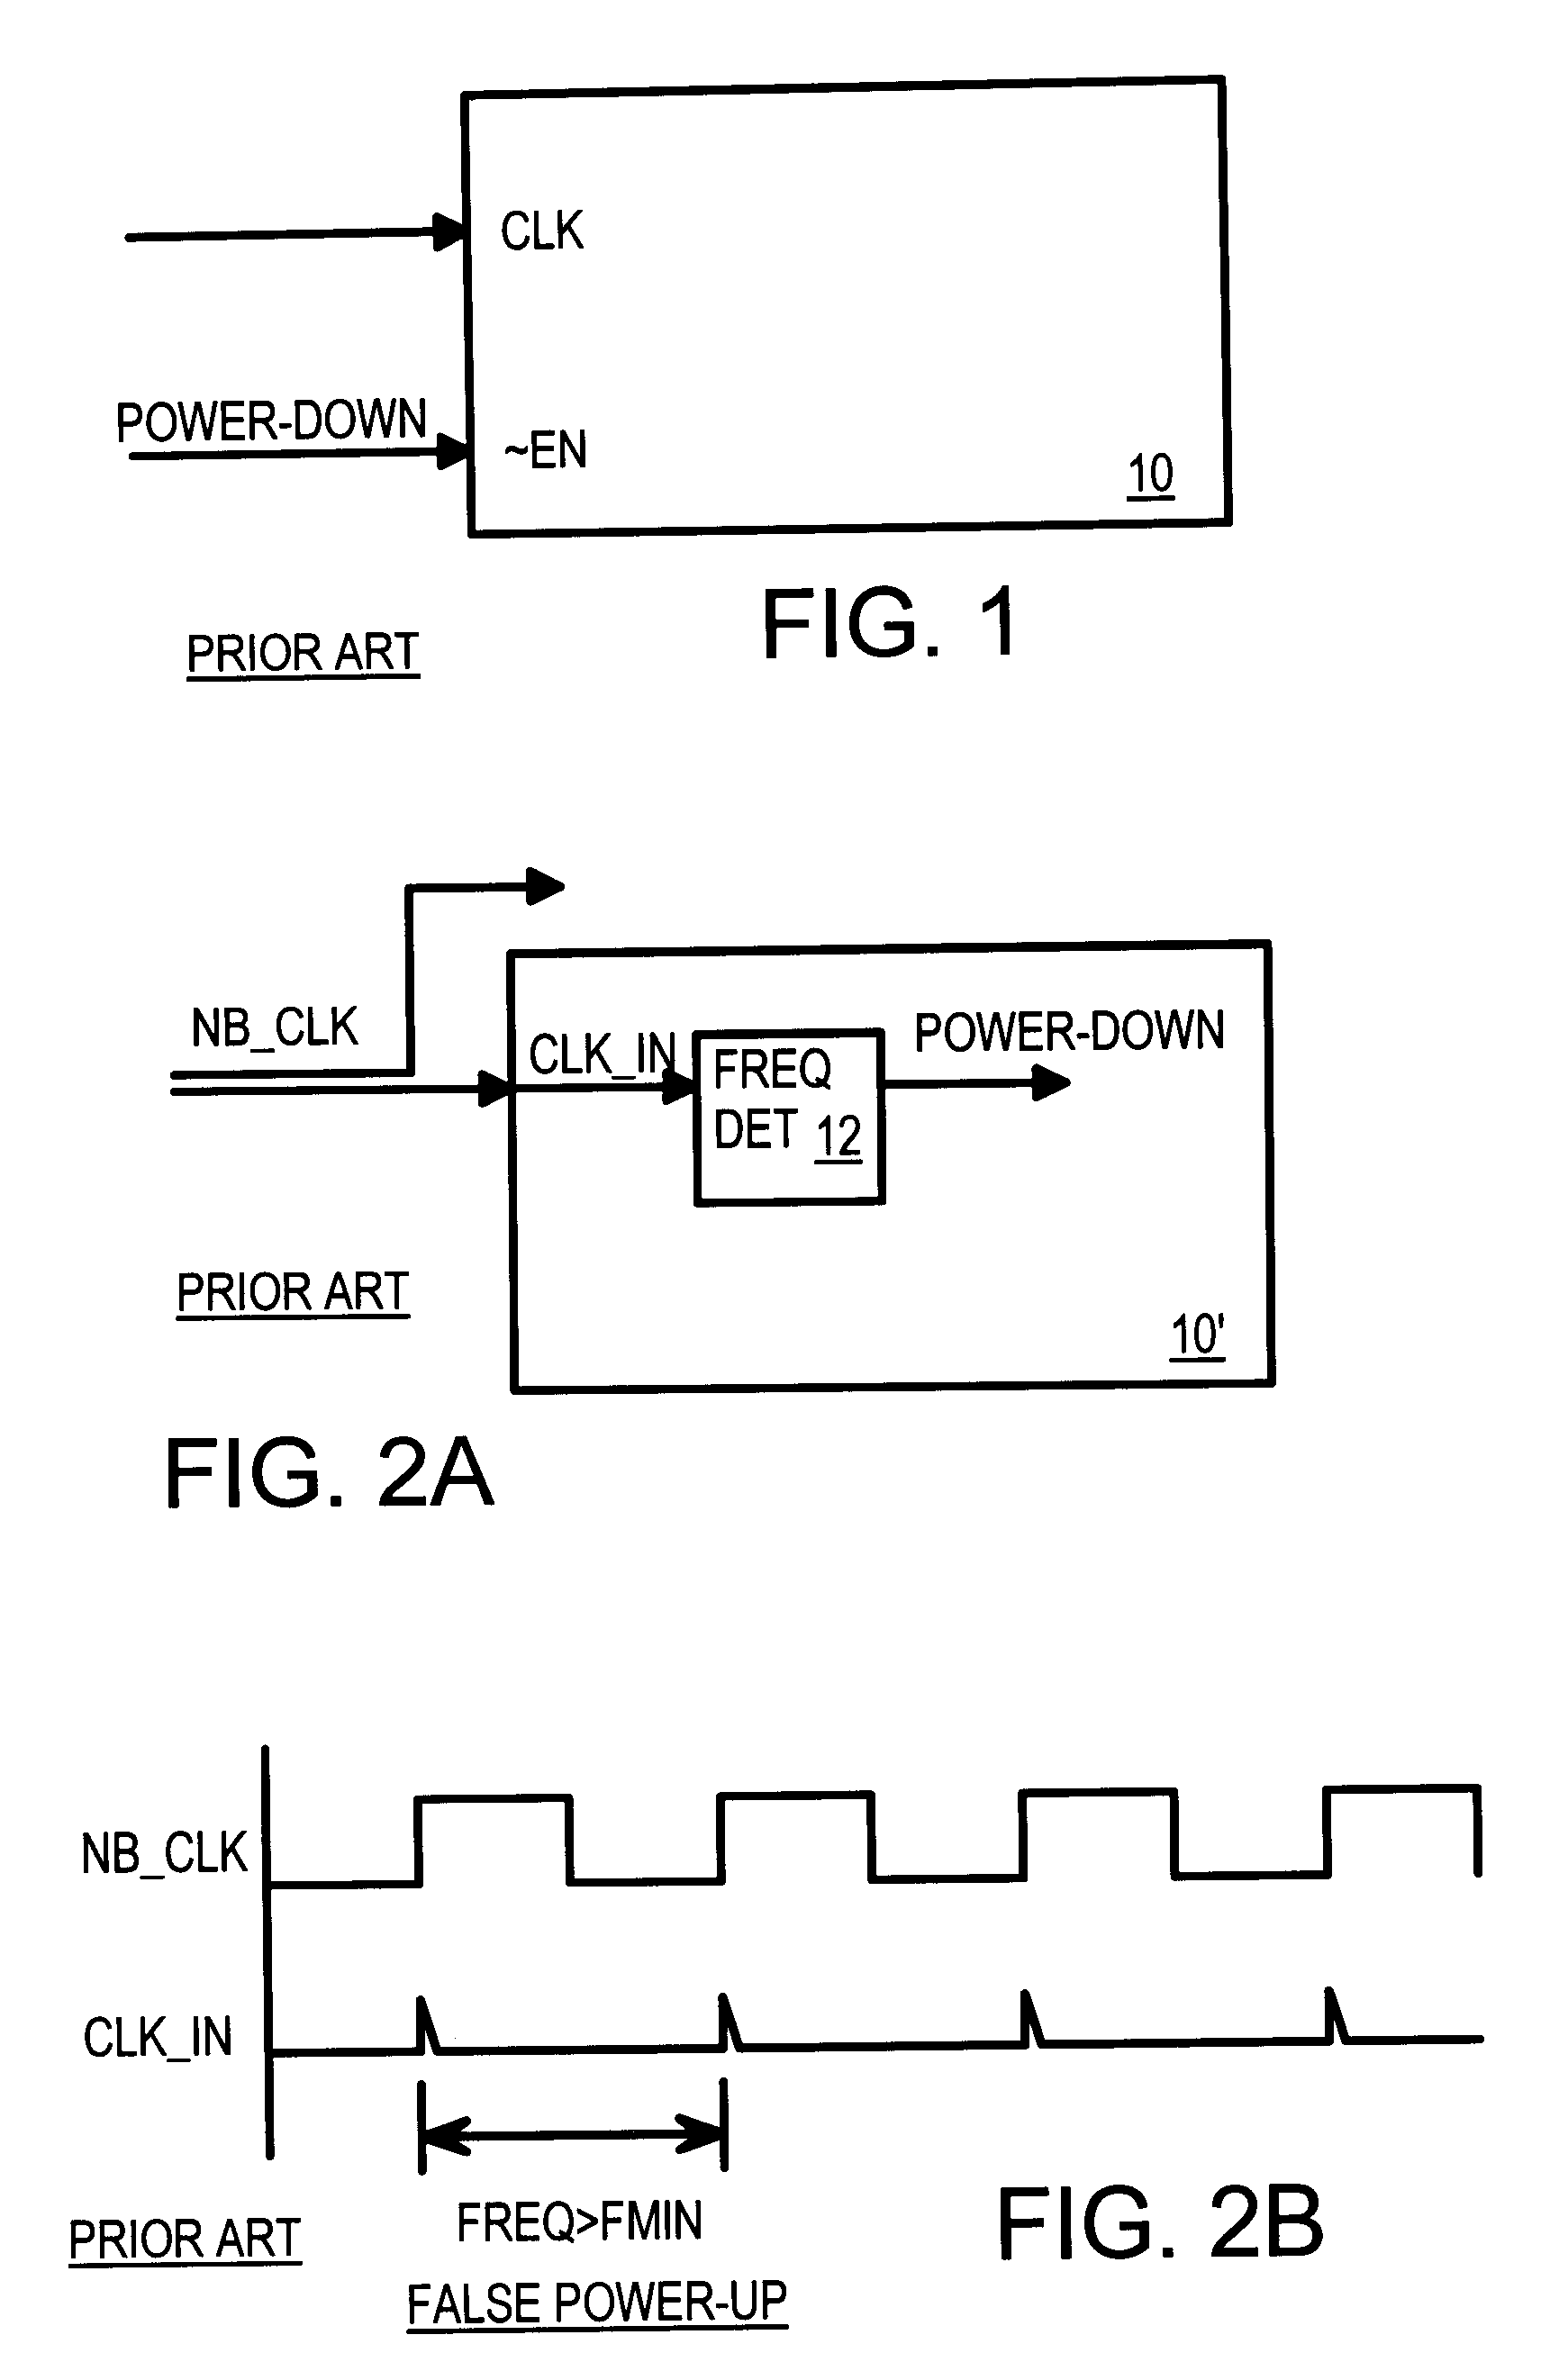 Power down circuit detecting duty cycle of input signal